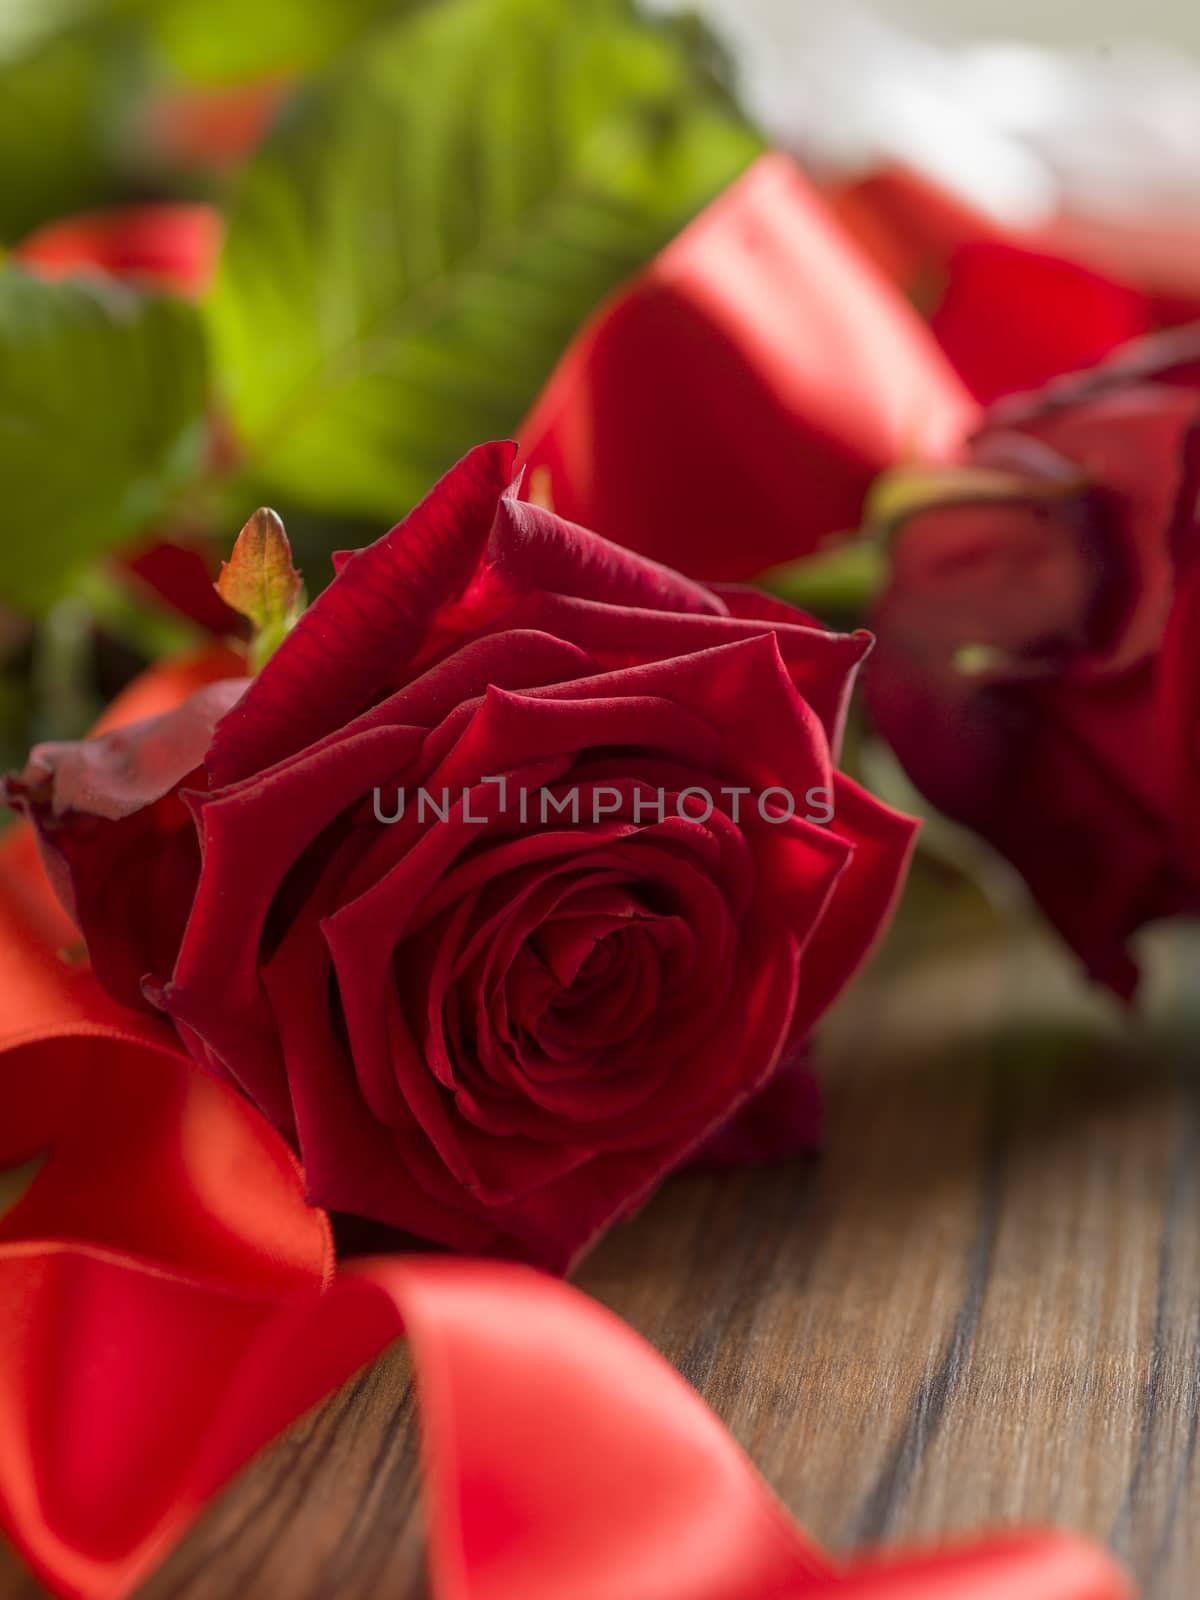 Valentine's day background with red roses and red ribbon on wood - Image